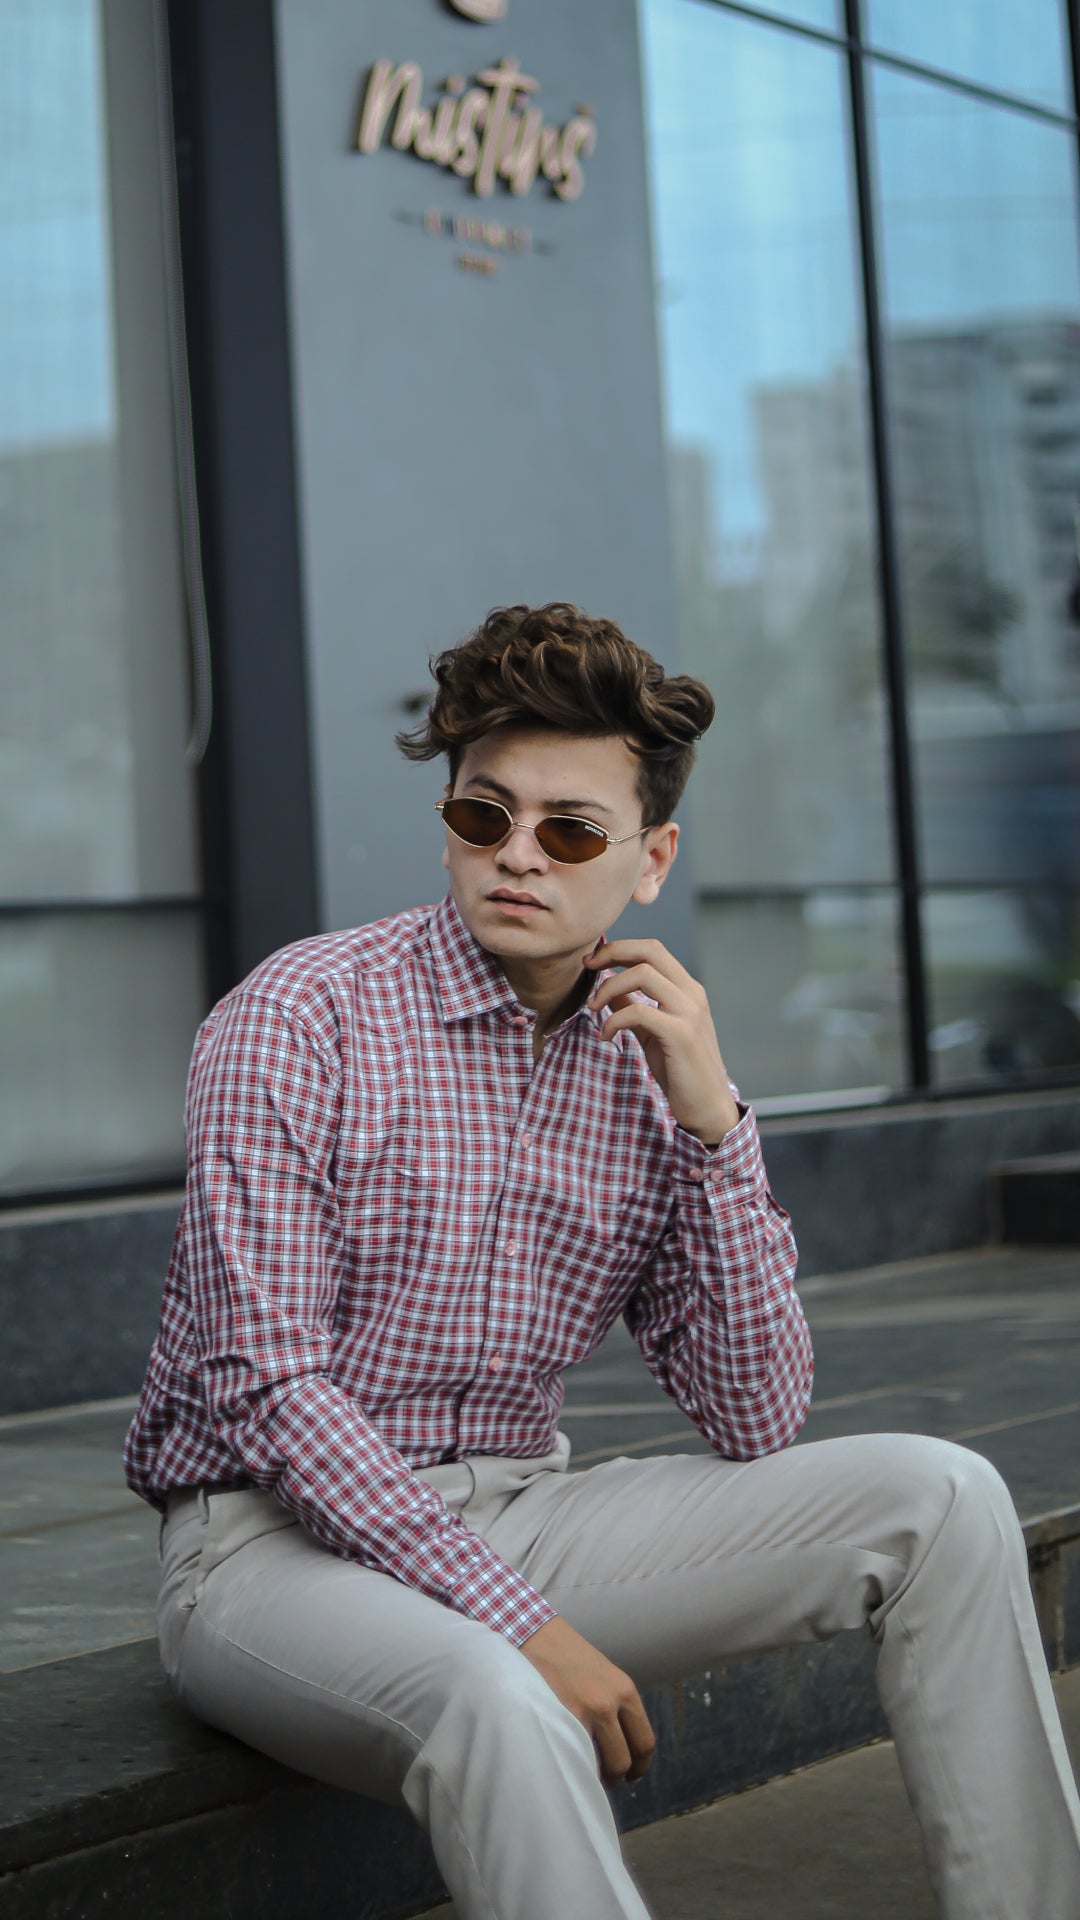 Dusty Red and White Checked Patterned Premium Giza Cotton Shirt